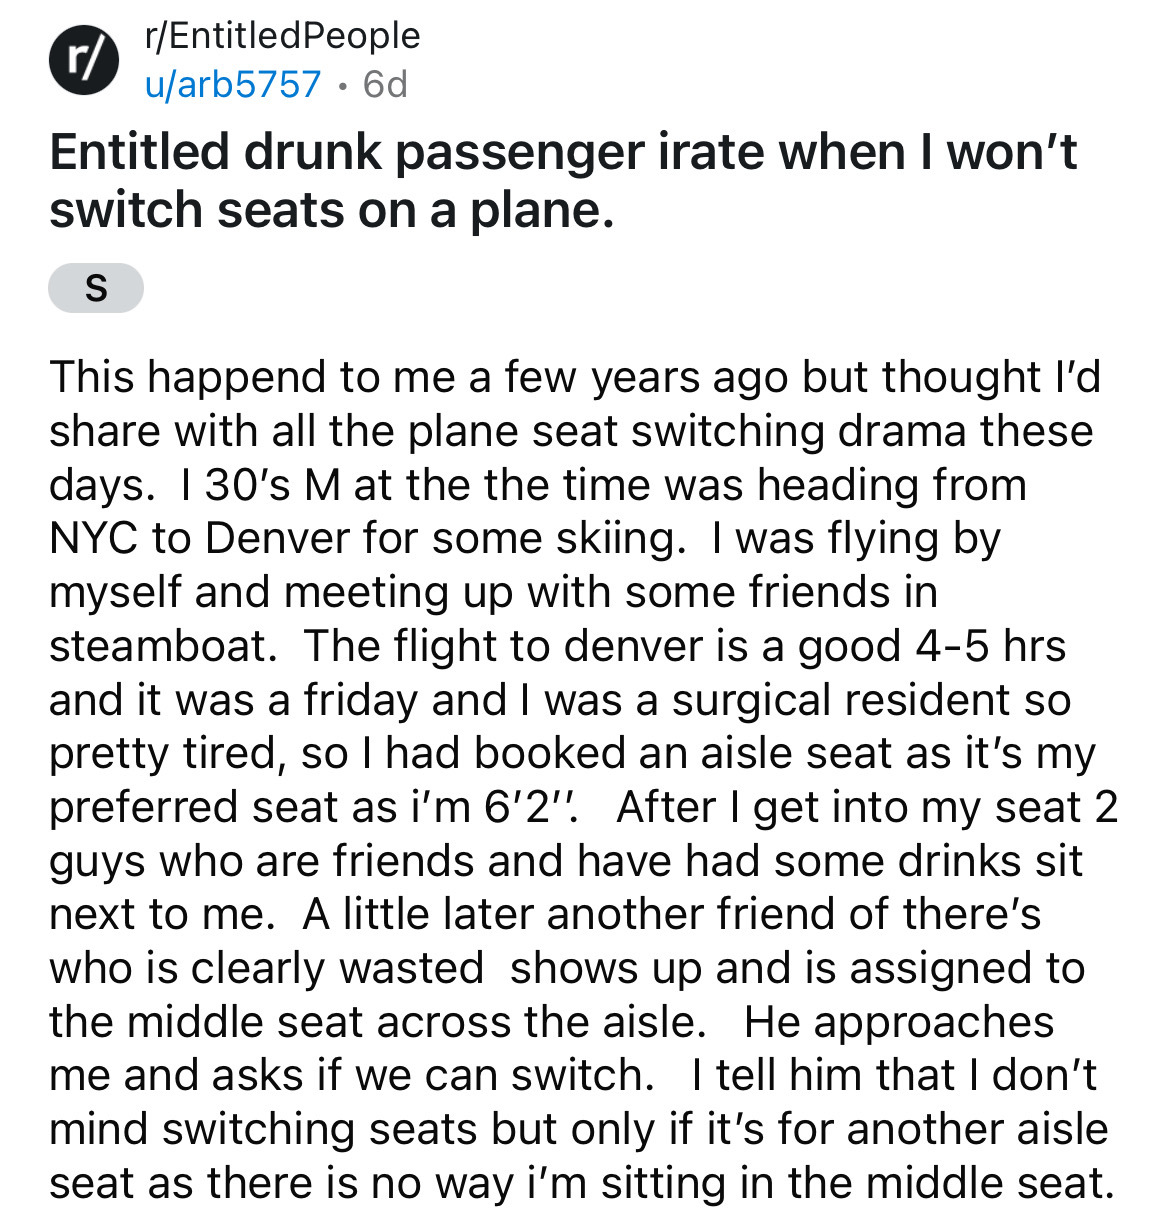 document - r rEntitled People uarb5757 6d Entitled drunk passenger irate when I won't switch seats on a plane. S This happend to me a few years ago but thought I'd with all the plane seat switching drama these days. 130's M at the the time was heading fro